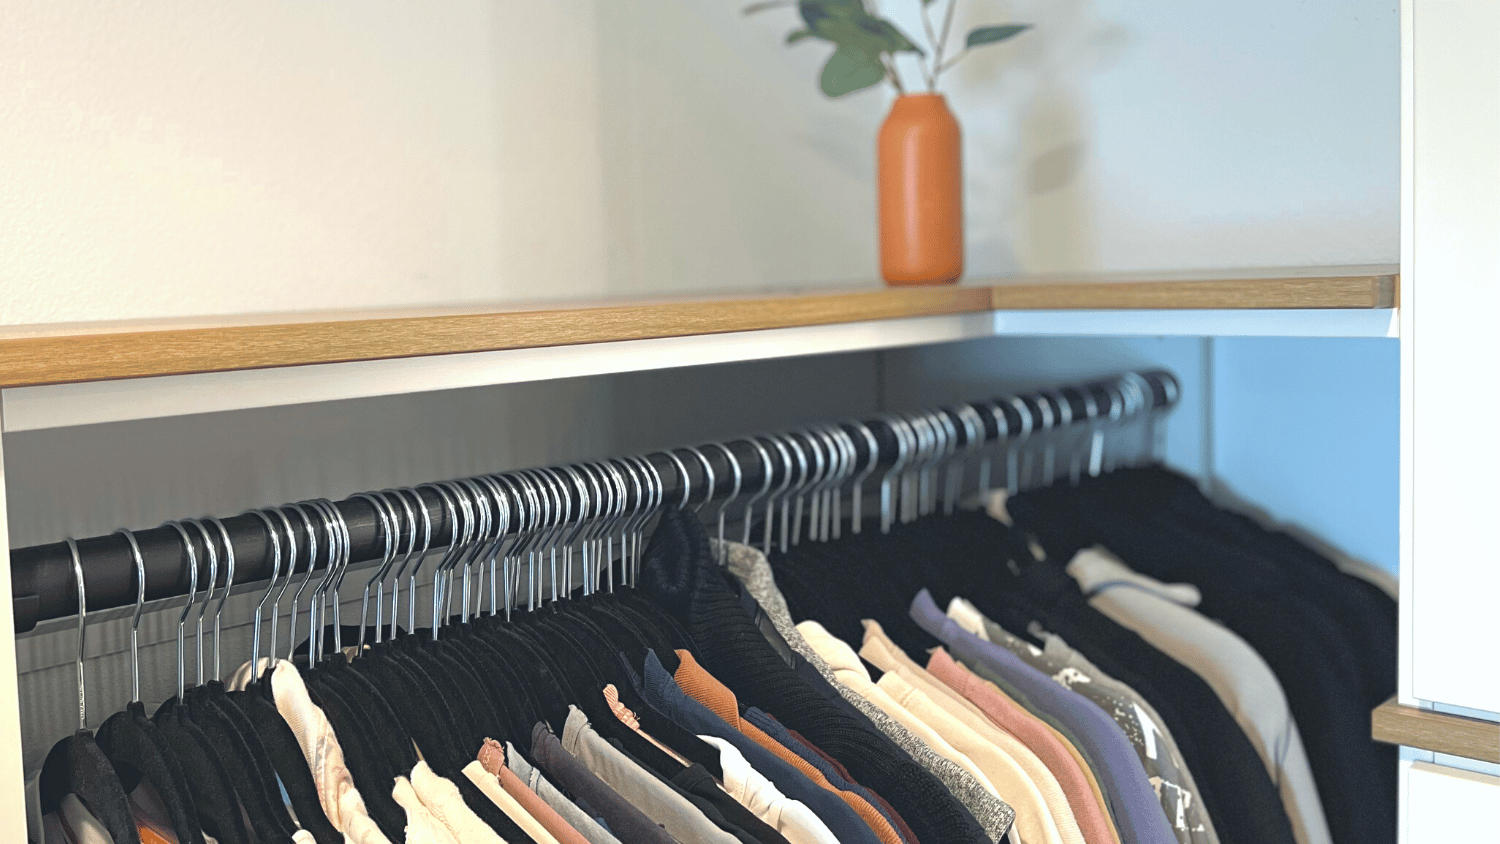 matching, black, slim velvet hangers hanging on a clothes rod in a closet